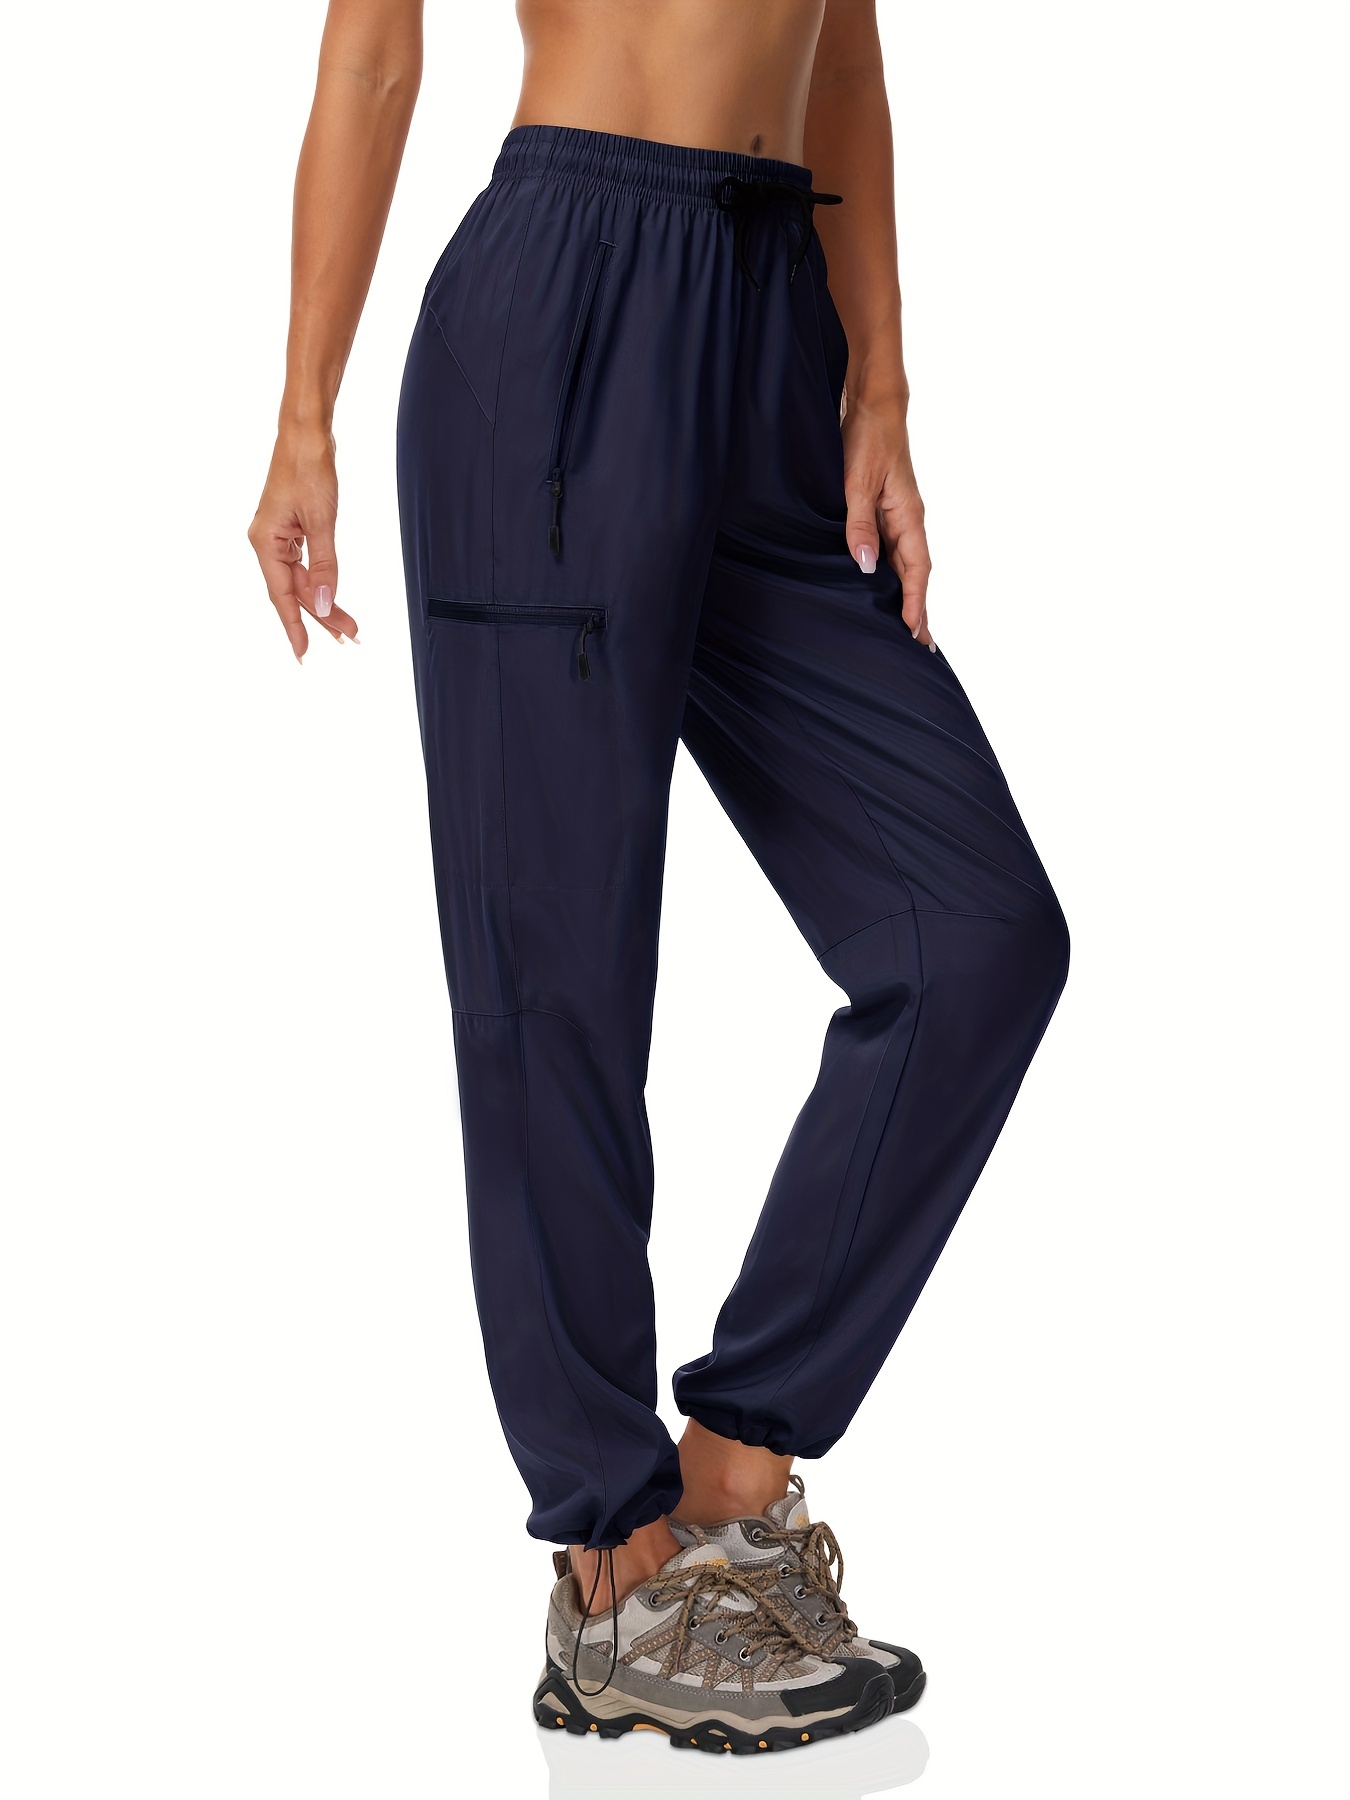 Women's Concepts Sport Navy/White USA Swimming Tradition Woven Pants